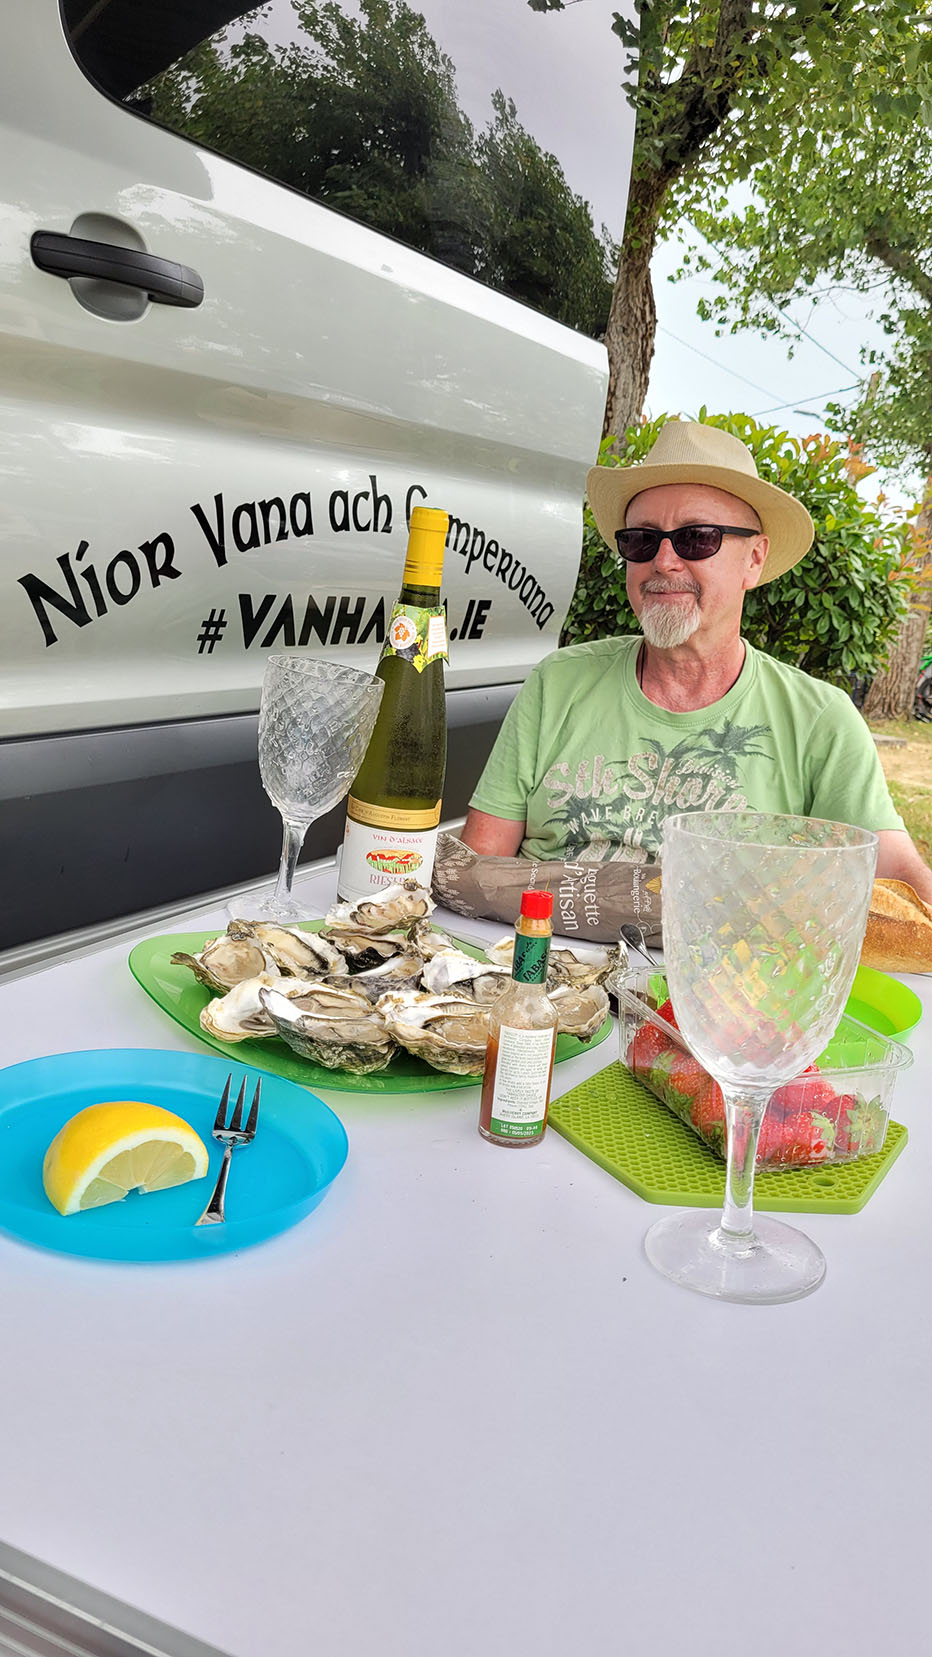 Fresh oysters from the market and lunch is served in Biarritz Camping